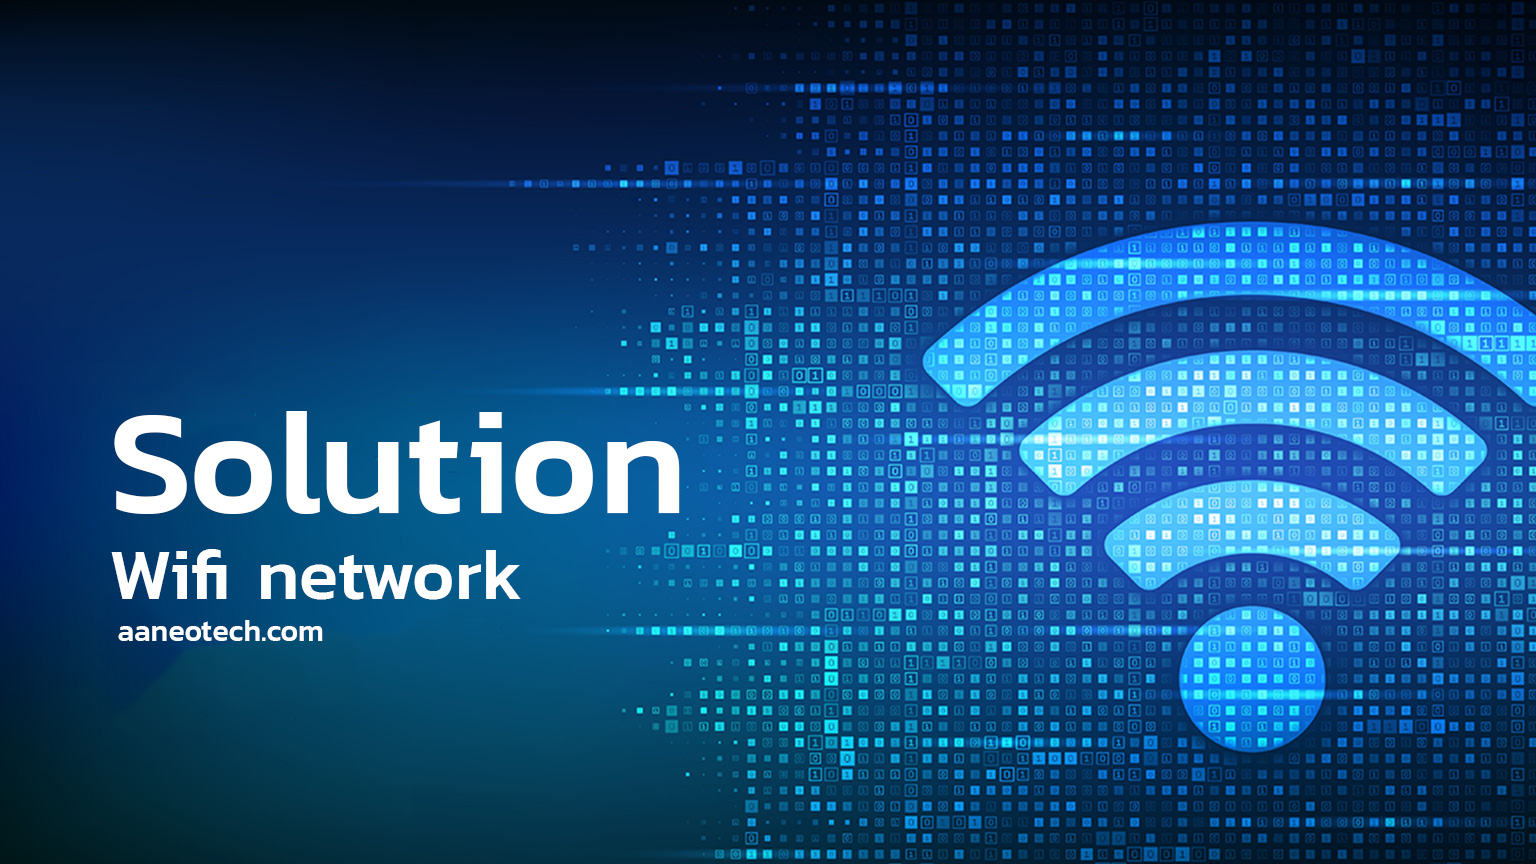 Solution Wifi network